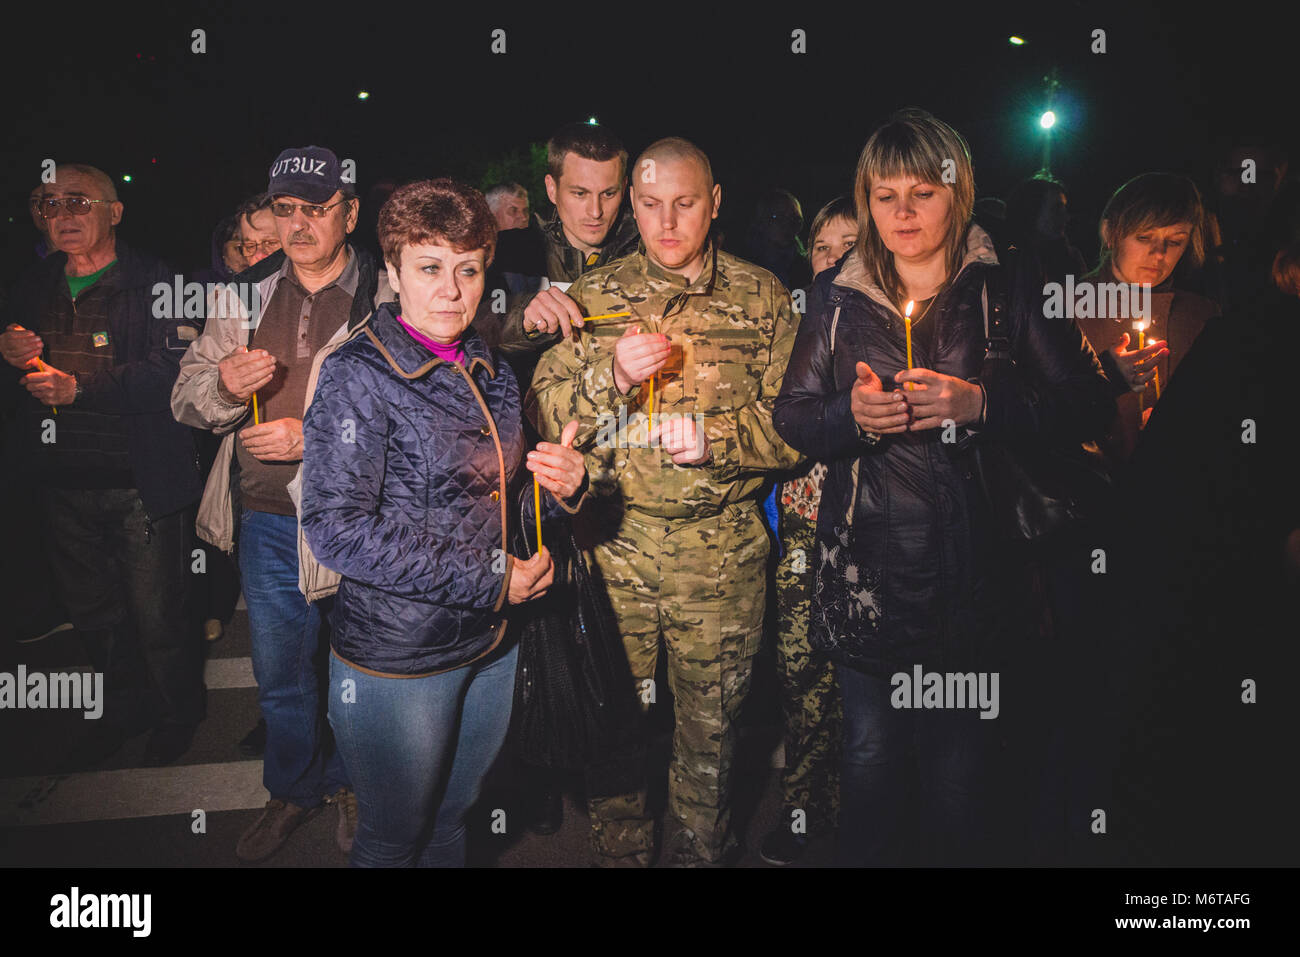 Ukraine, Chernobyl main square, 2016 April 25th: People celebrating the 30th anniversary of the Chernobyl nuclear disaster Photo: Alessandro Bosio Stock Photo